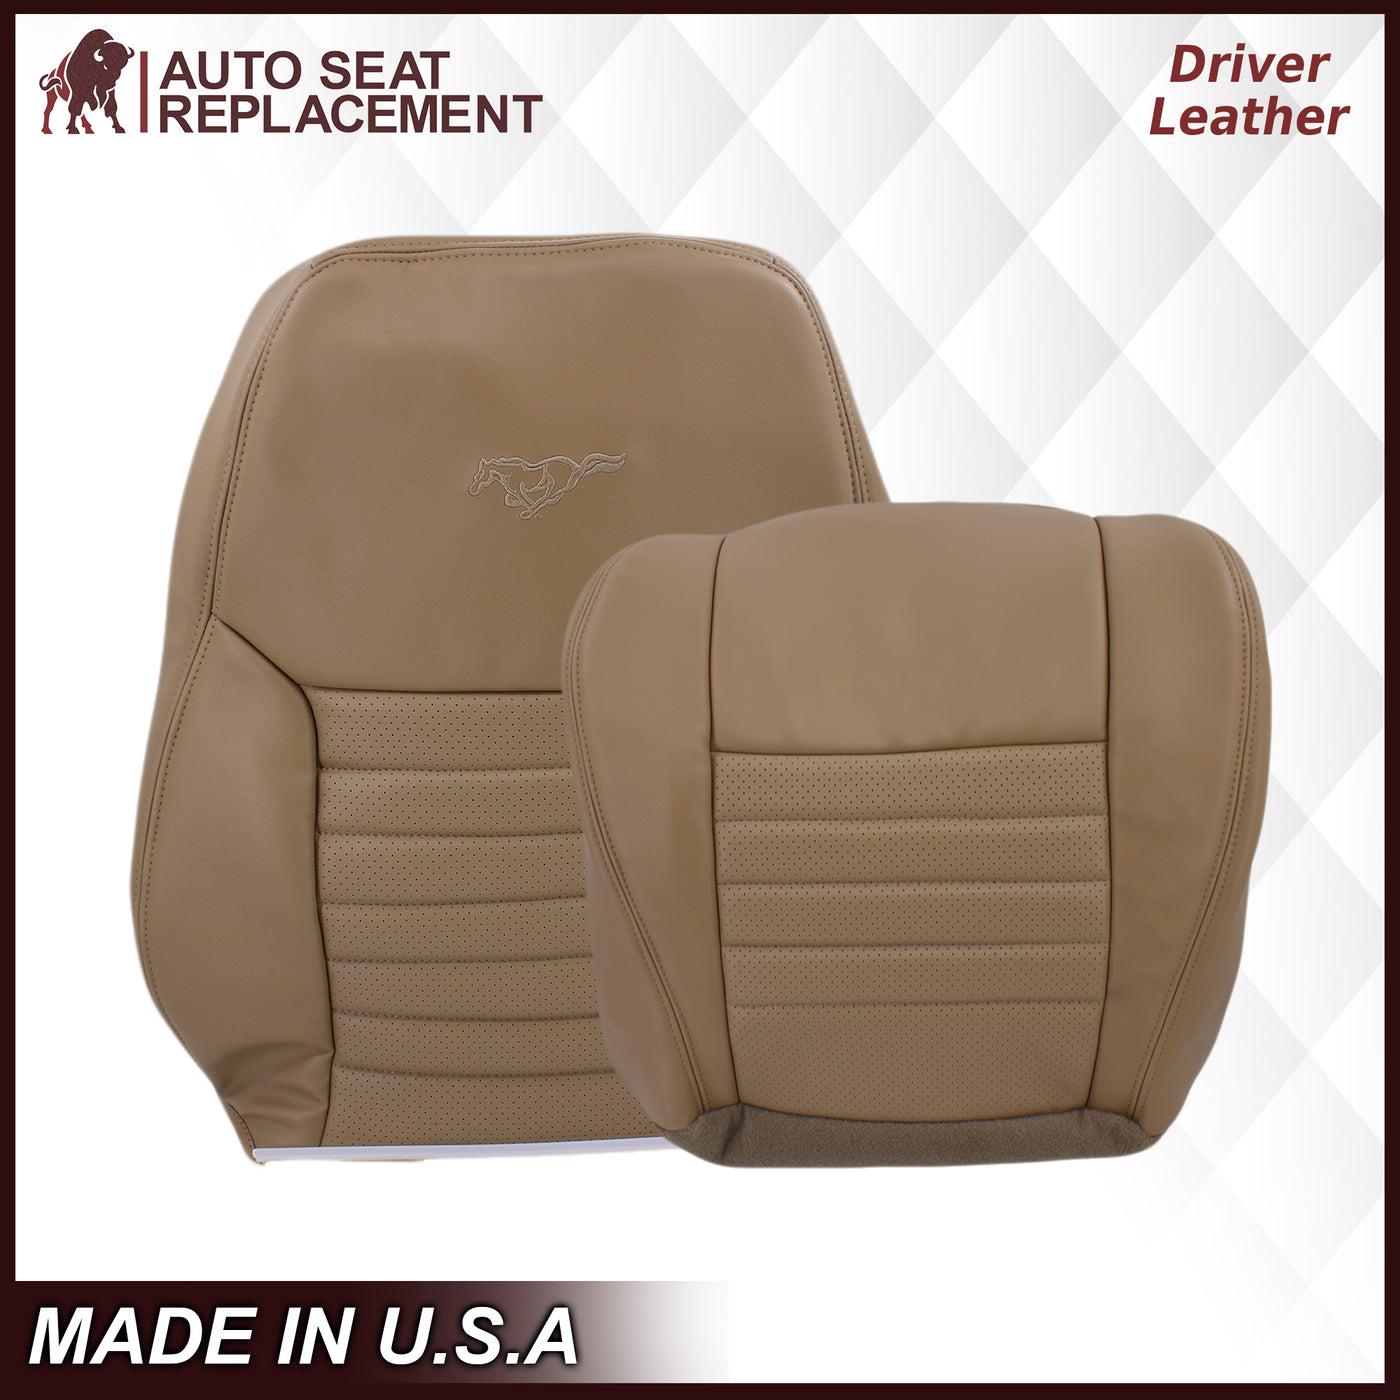 1999-2004 Ford Mustang GT Convertible in Medium Parchment Tan: Choose From  Variation